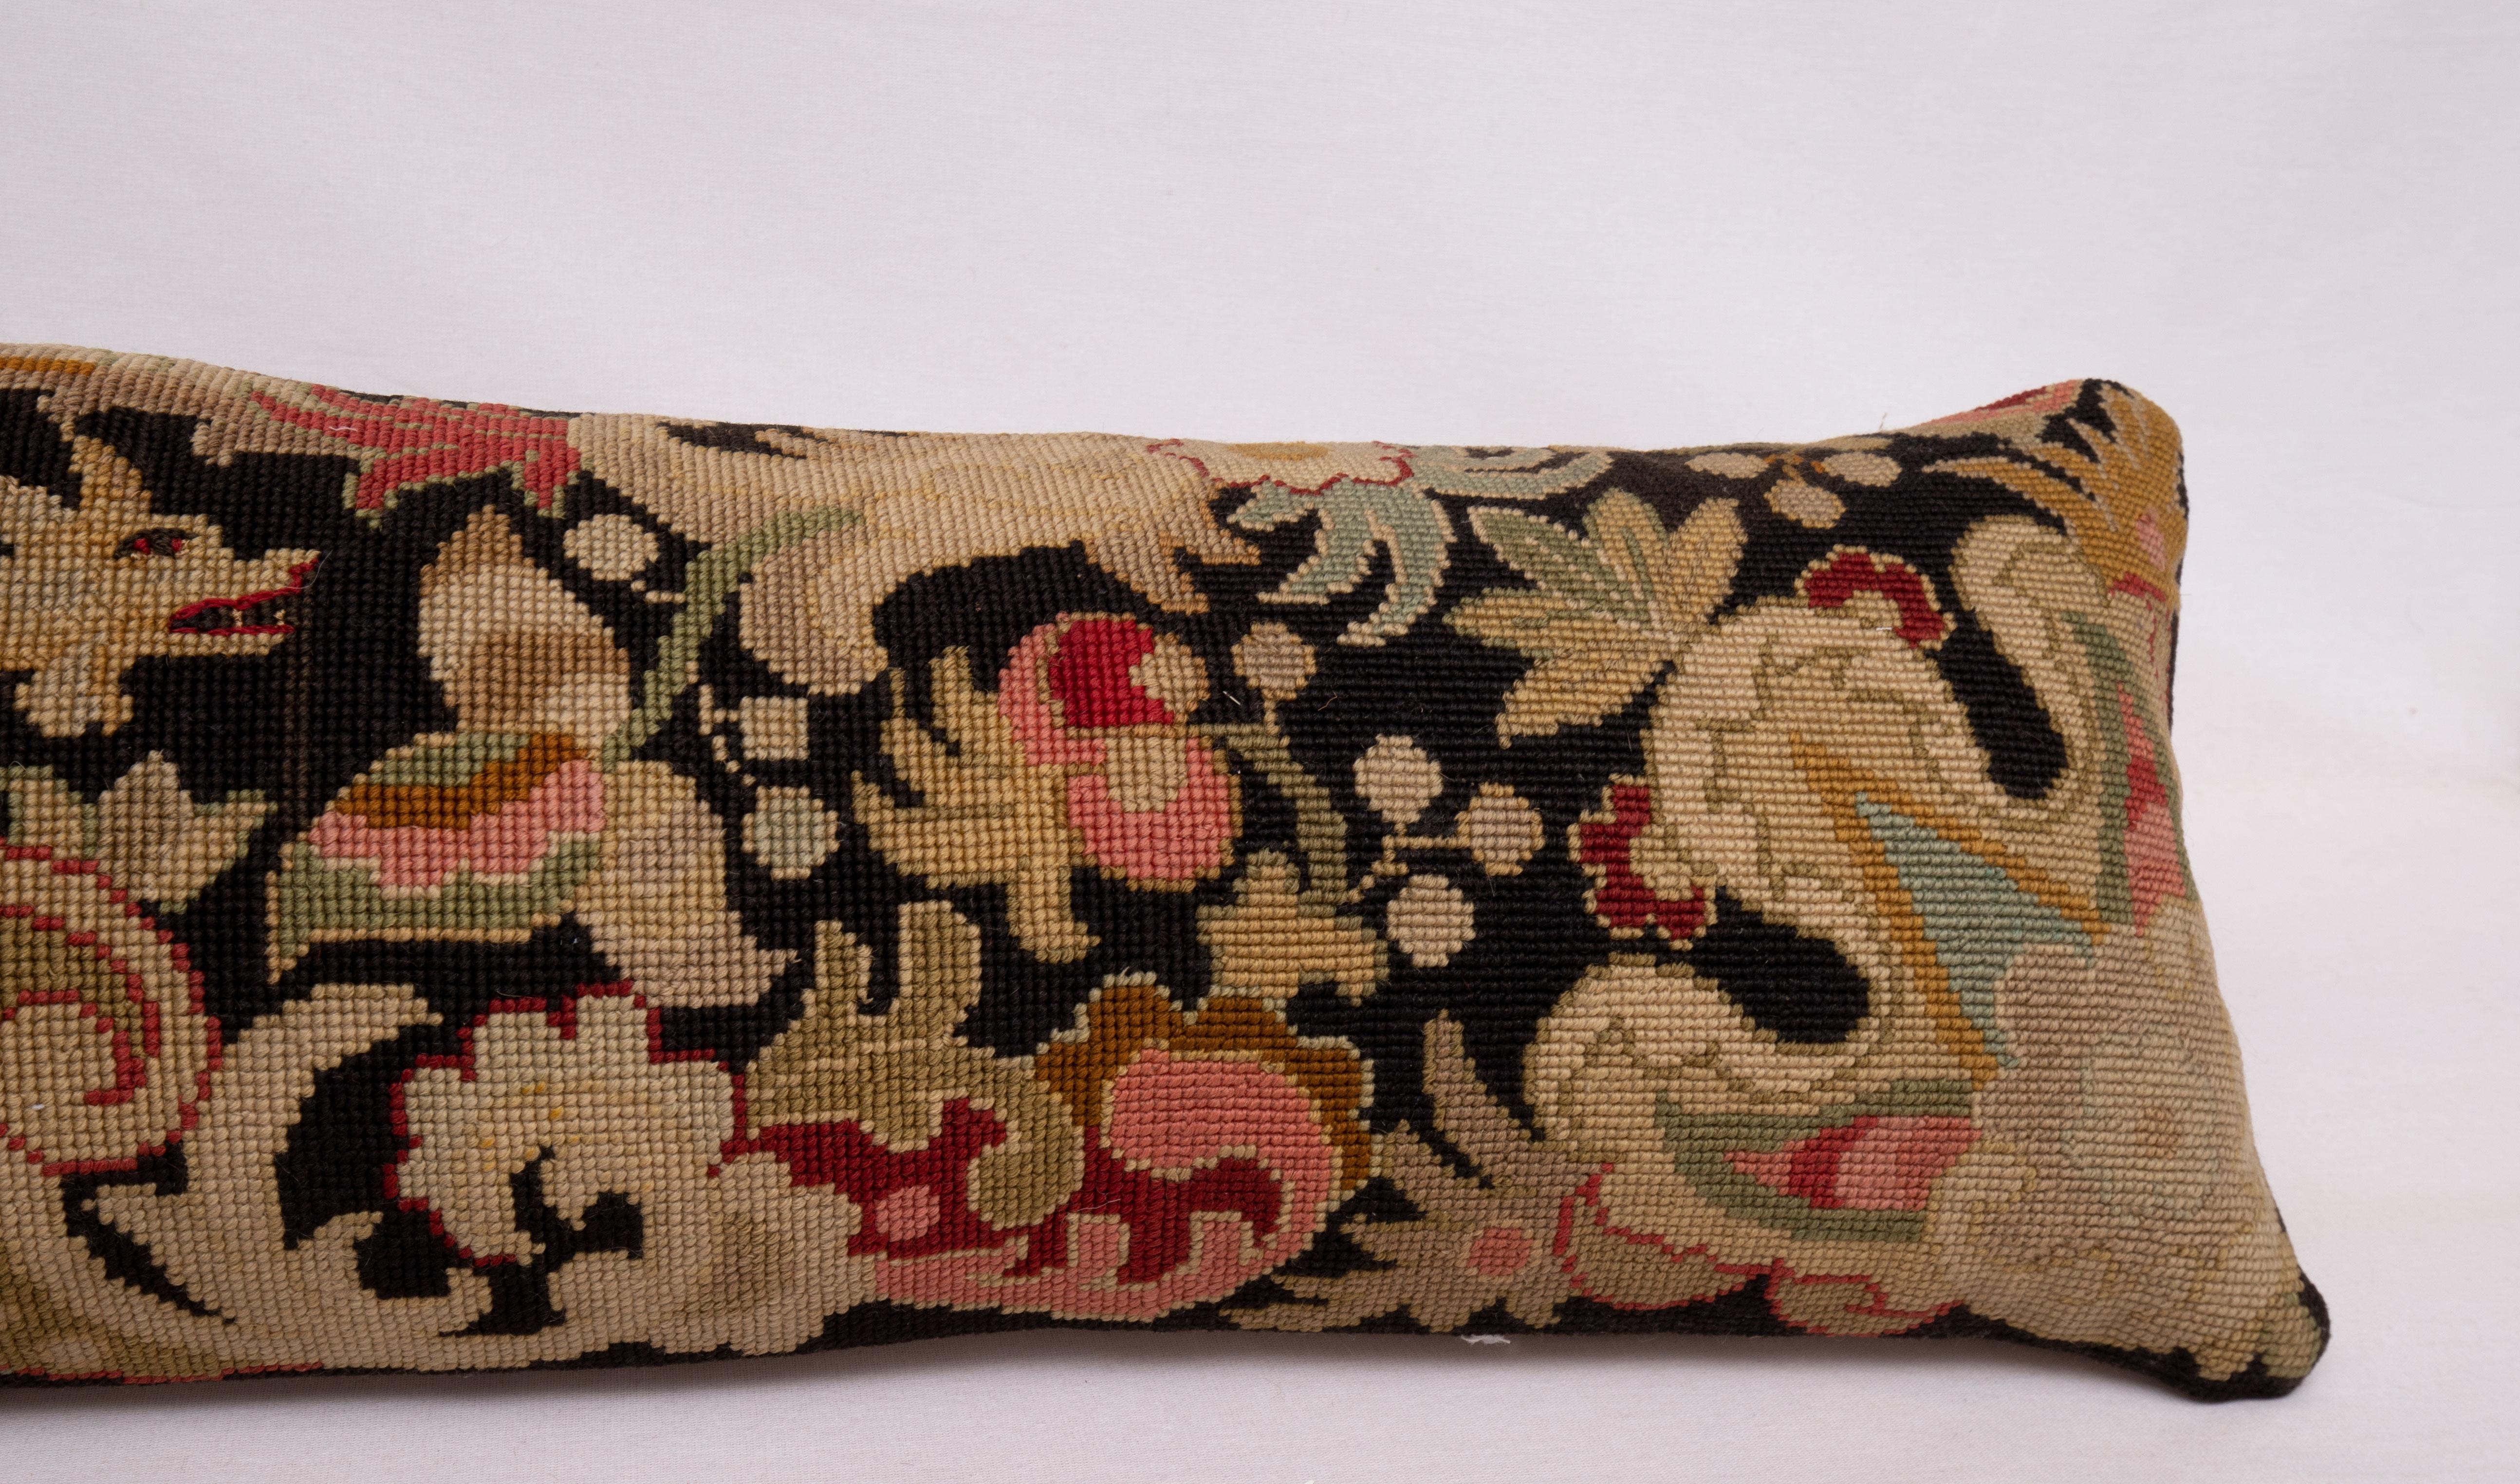 19th Century Lumbar Pillowcase Made from an Antique European Embroidered Panel